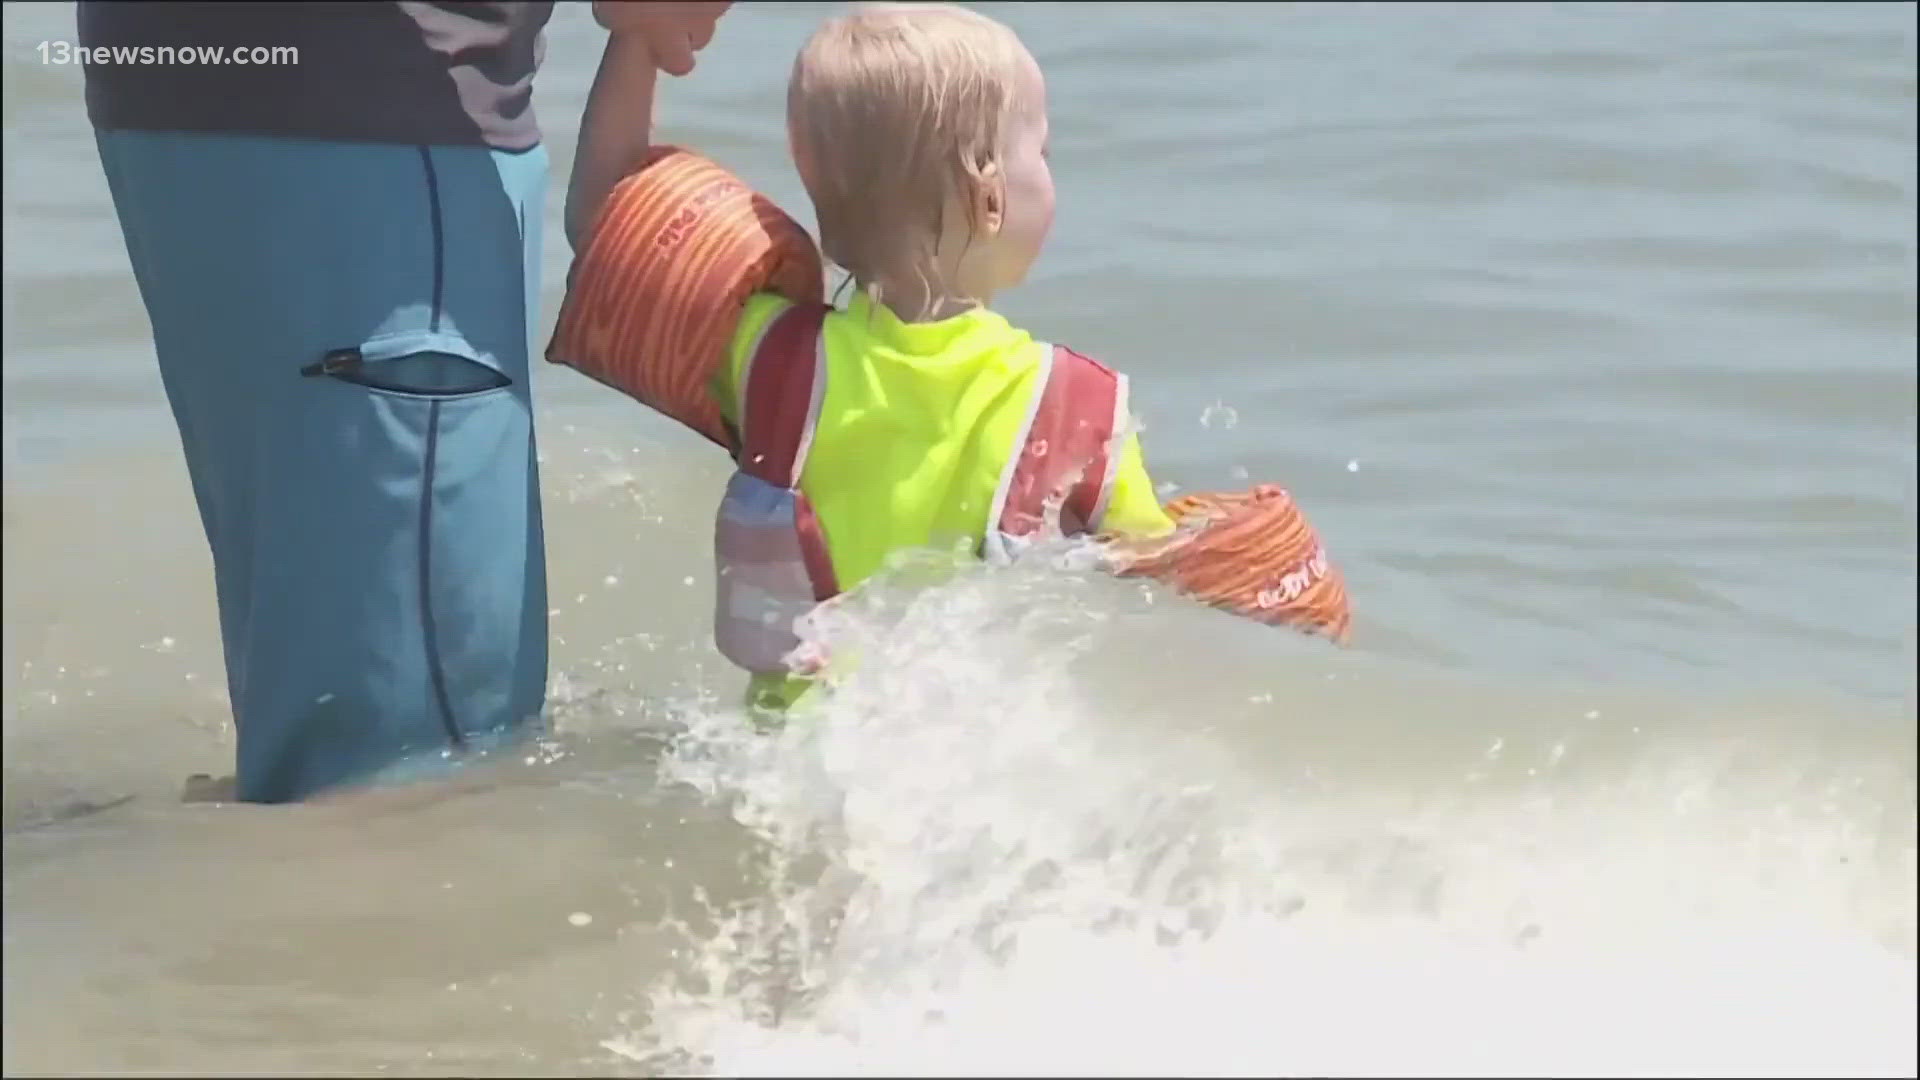 We still don't know what exactly bit the child, but marine life experts say there's nothing to worry about if you're headed to the beach this weekend.